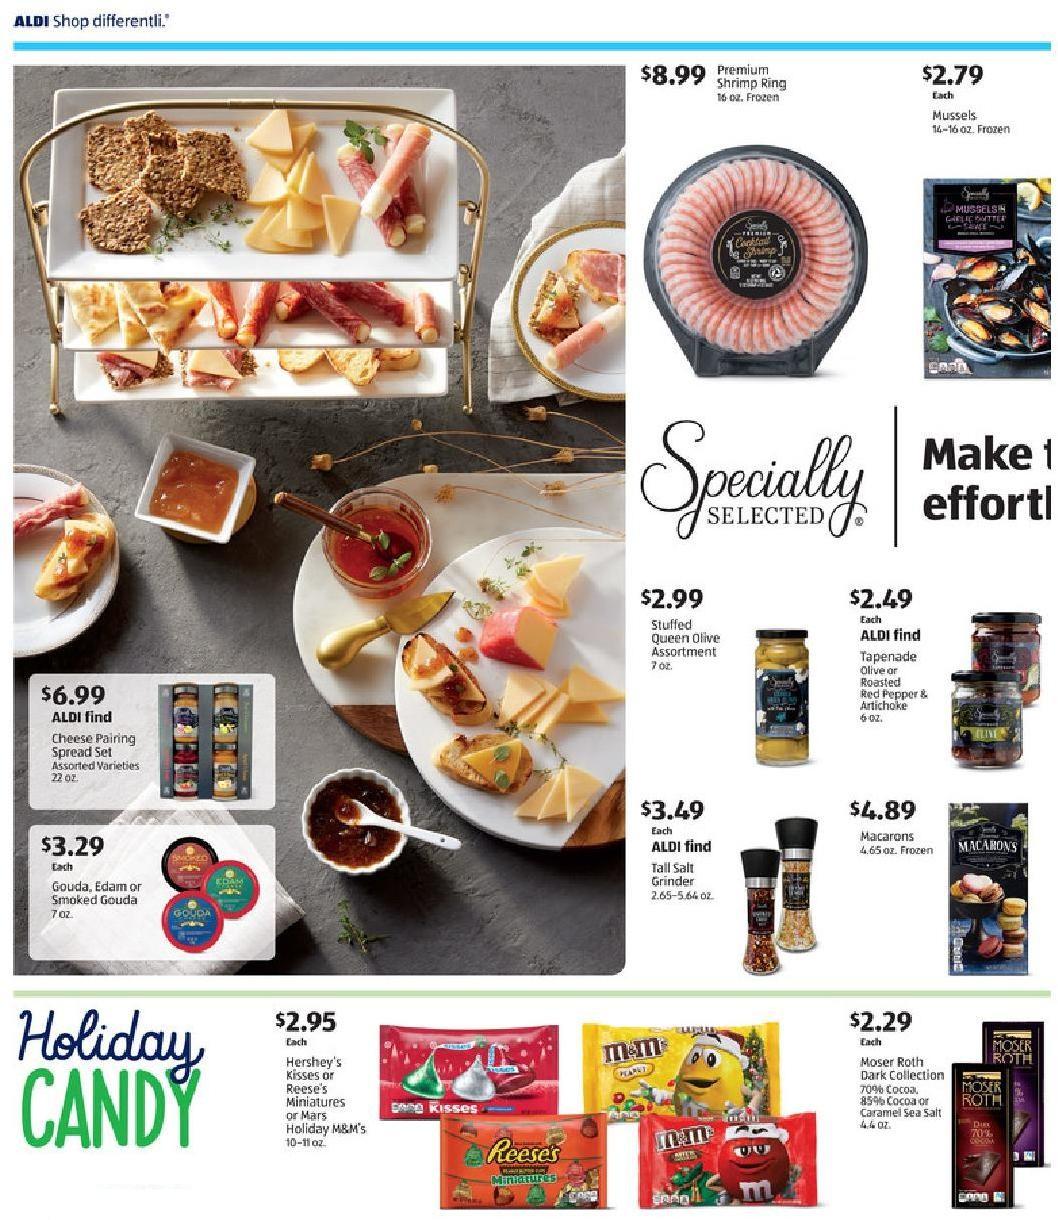 ALDI Weekly Ad from December 13